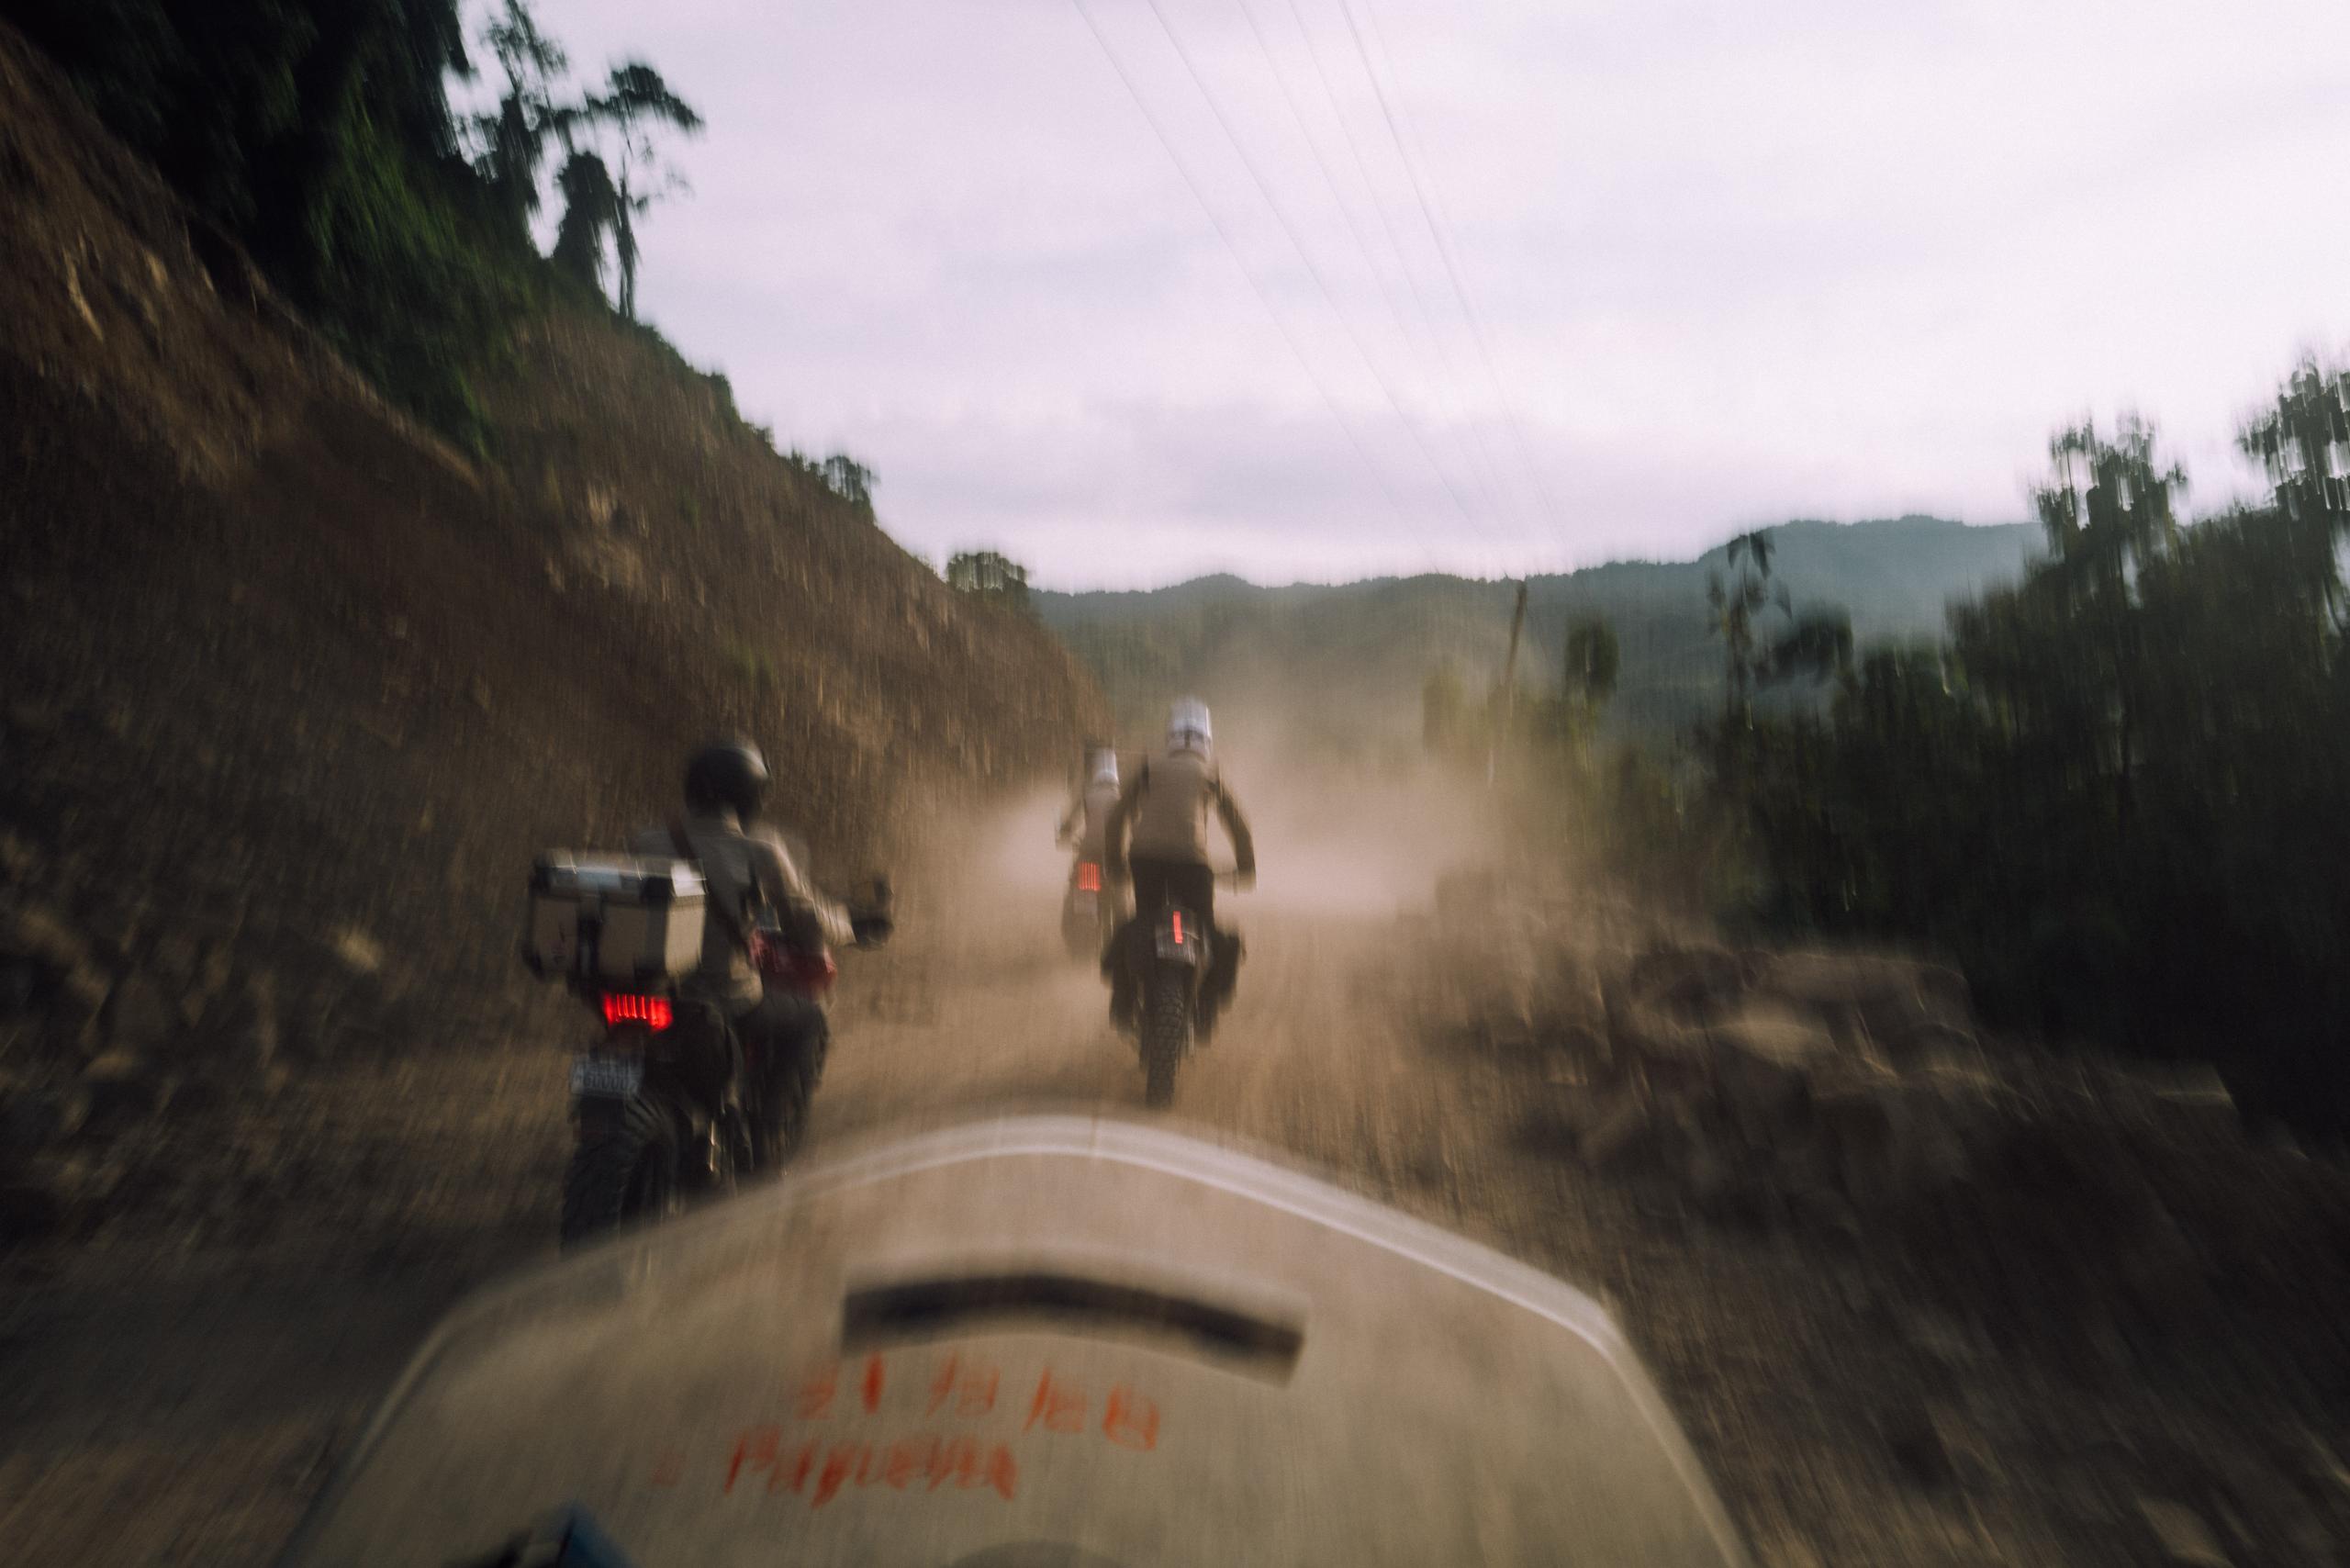 Point-of-view photo of motorcyclist riding down dirt road in Costa Rica